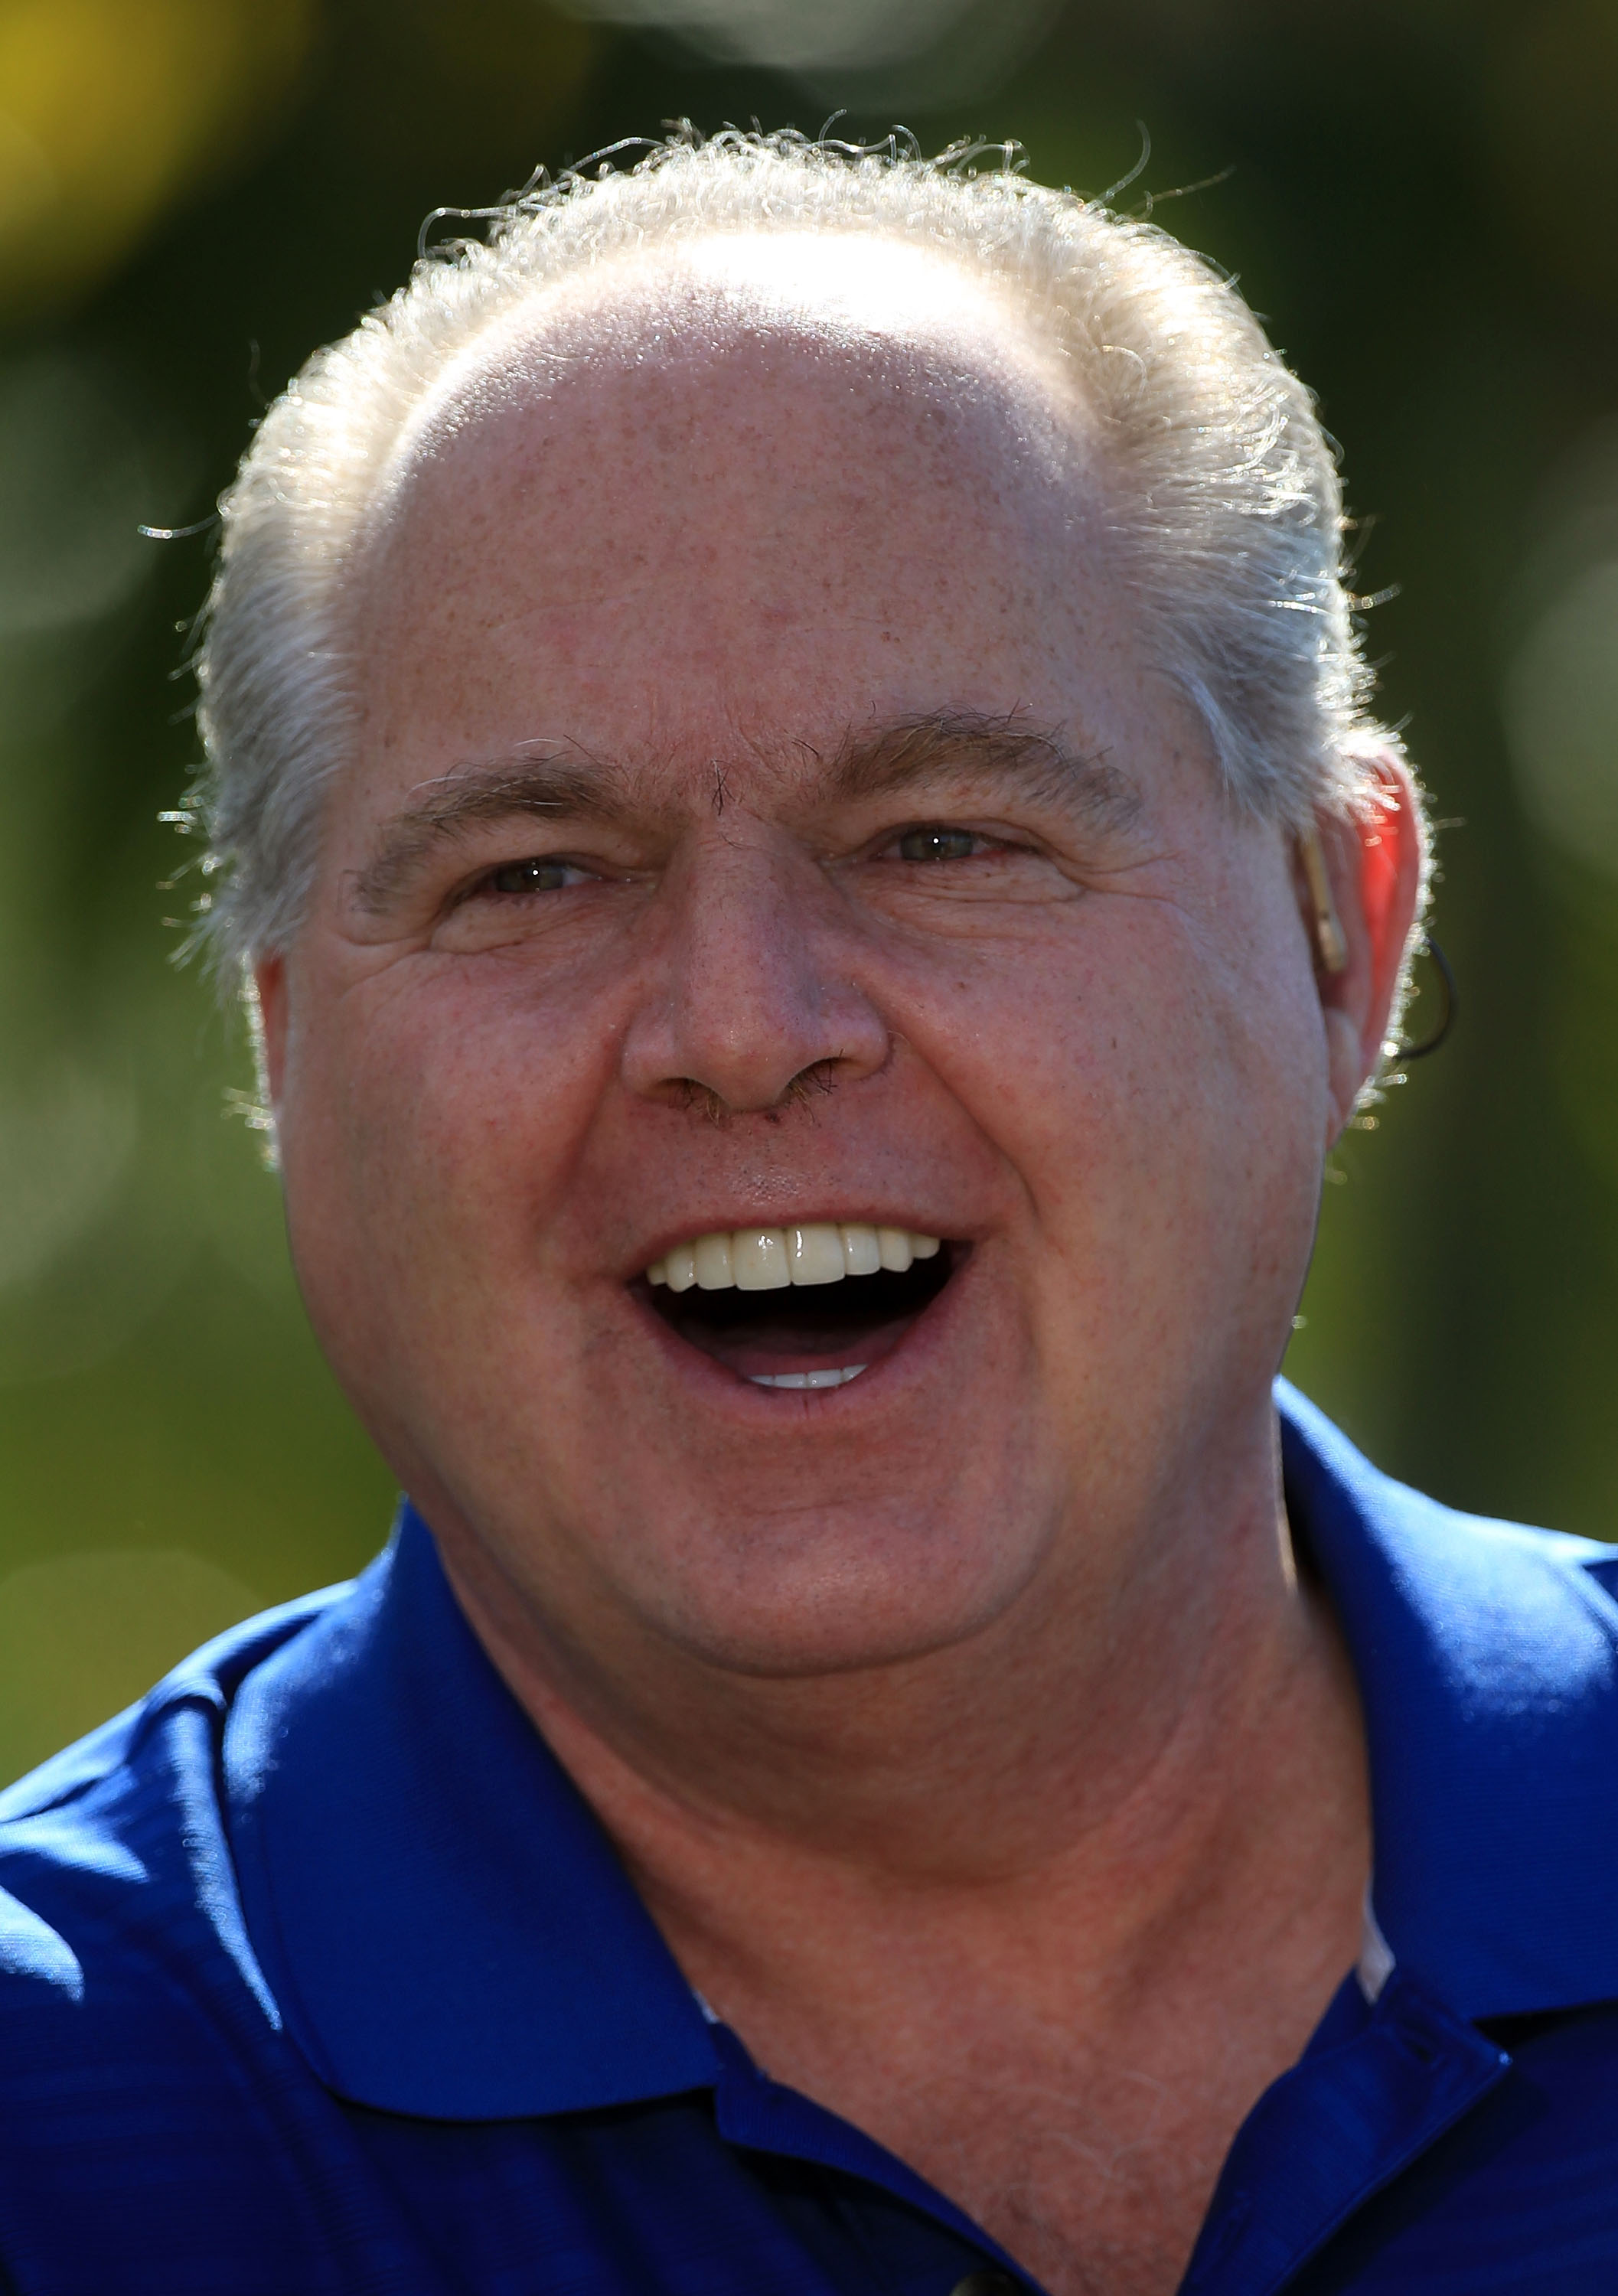 PALM BEACH GARDENS, FL - MARCH 15: Rush Limbaugh during the Els for Autism Pro-Am on the Champions Course at the PGA National Golf Club on March 15, 2010 in Palm Beach Gardens, Florida.  (Photo by David Cannon/Getty Images)